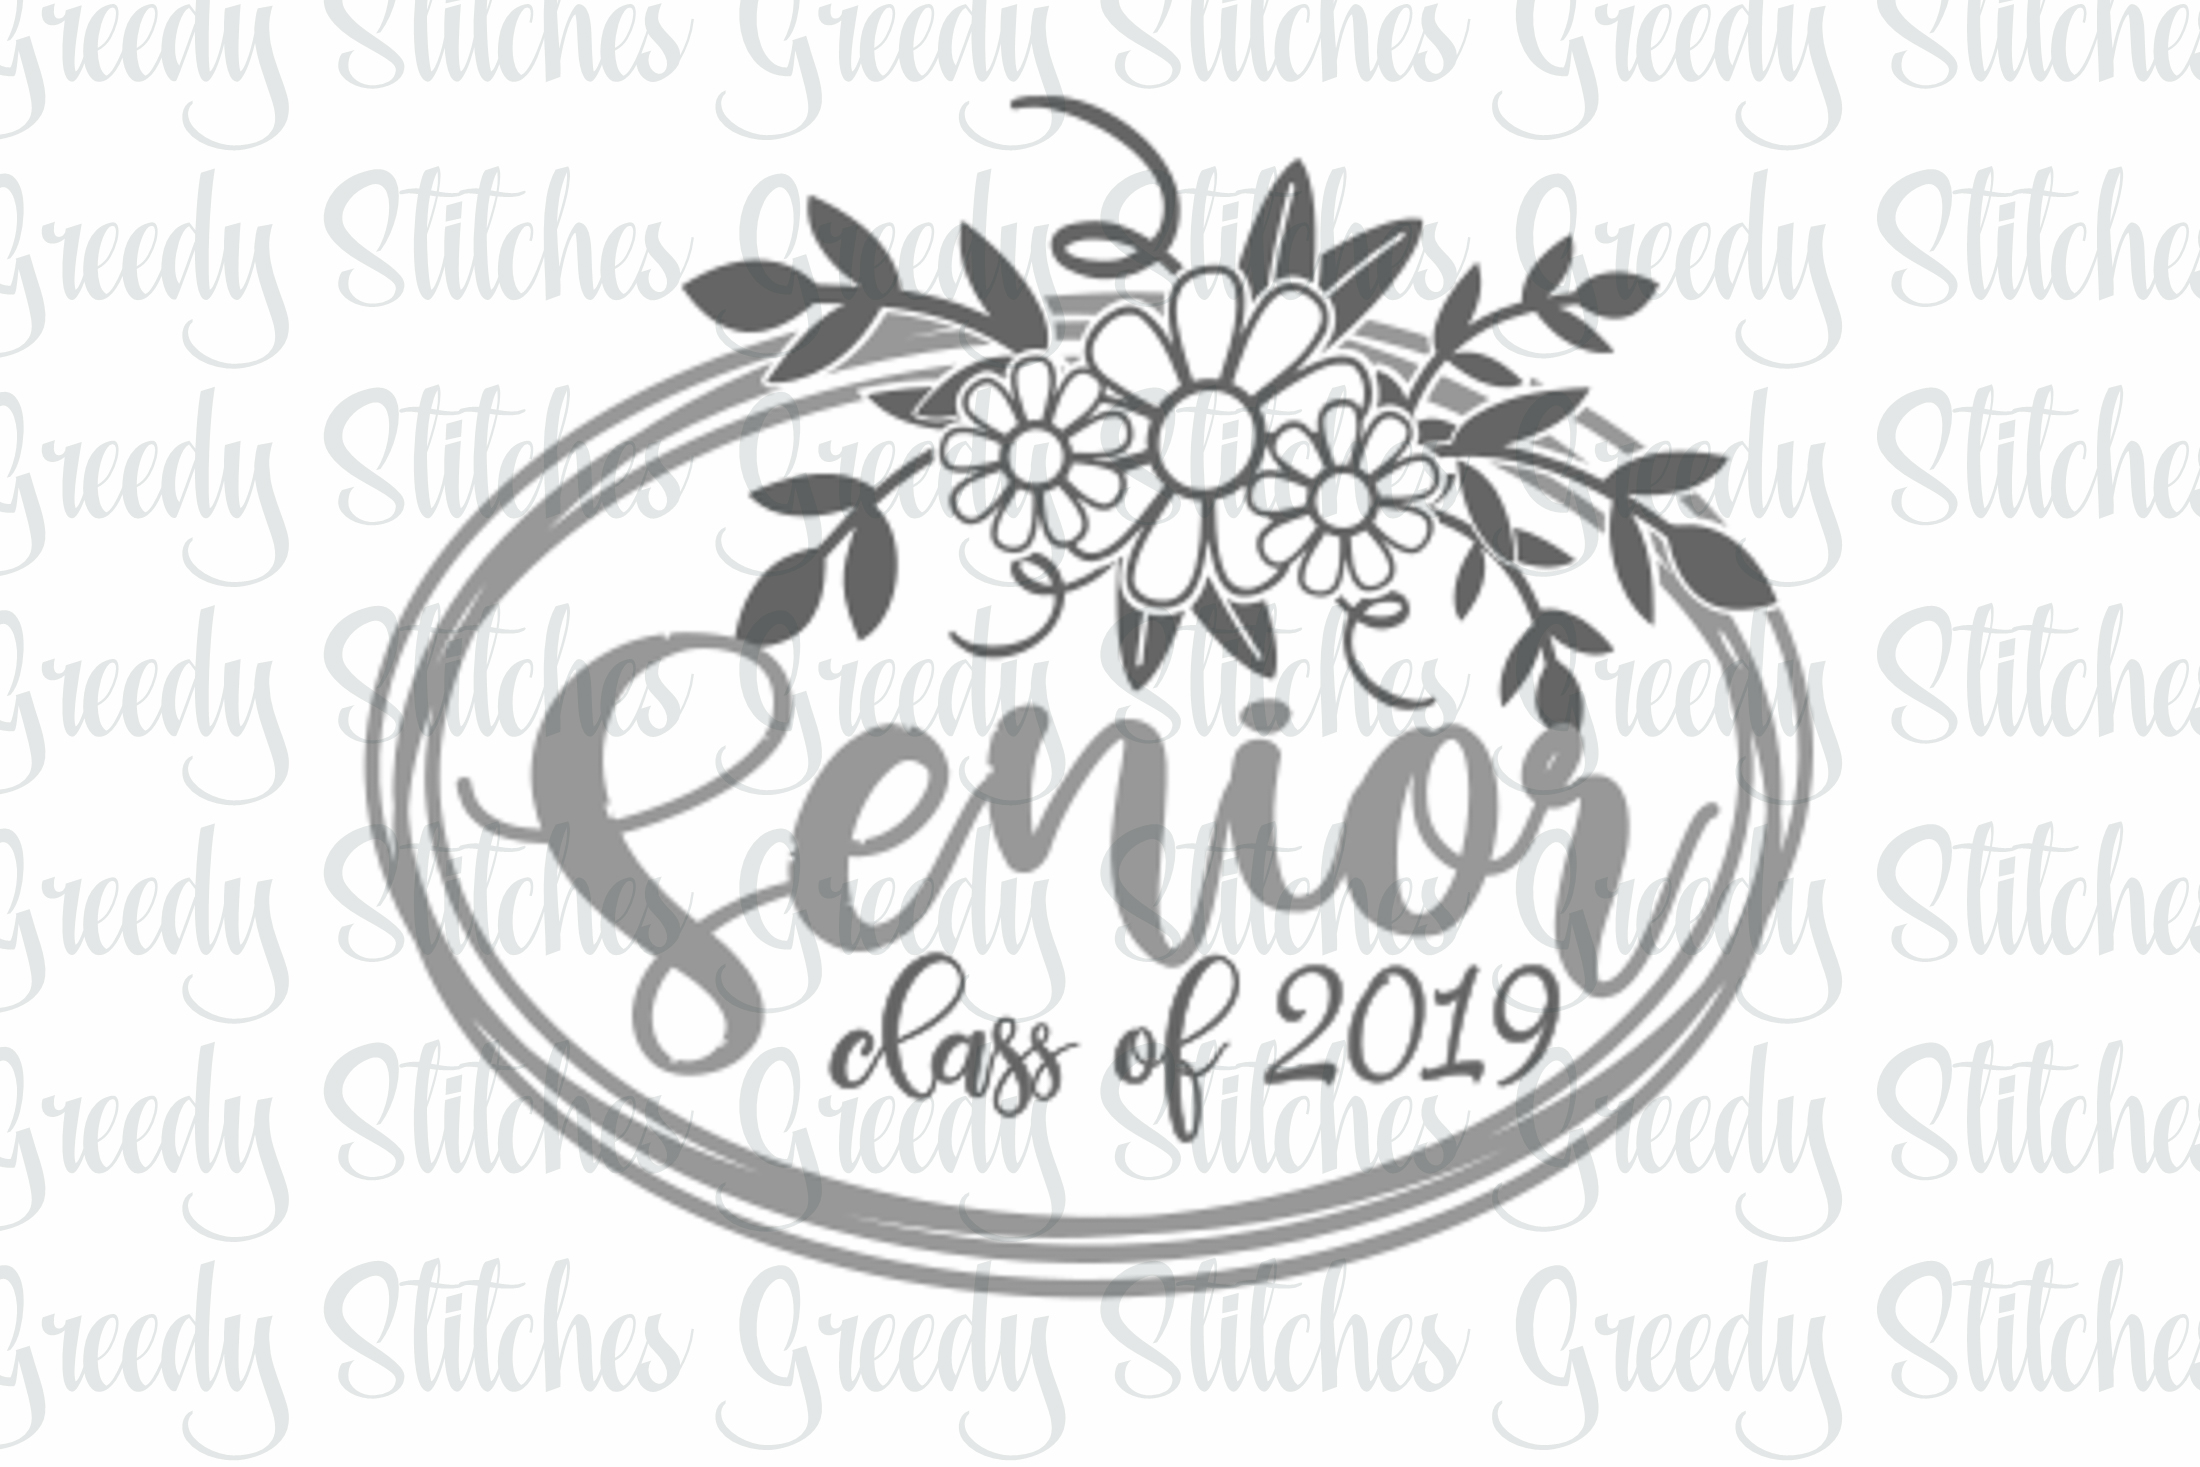 Download Floral Senior Class of 2019 svg, dxf, eps, png. (125383 ...